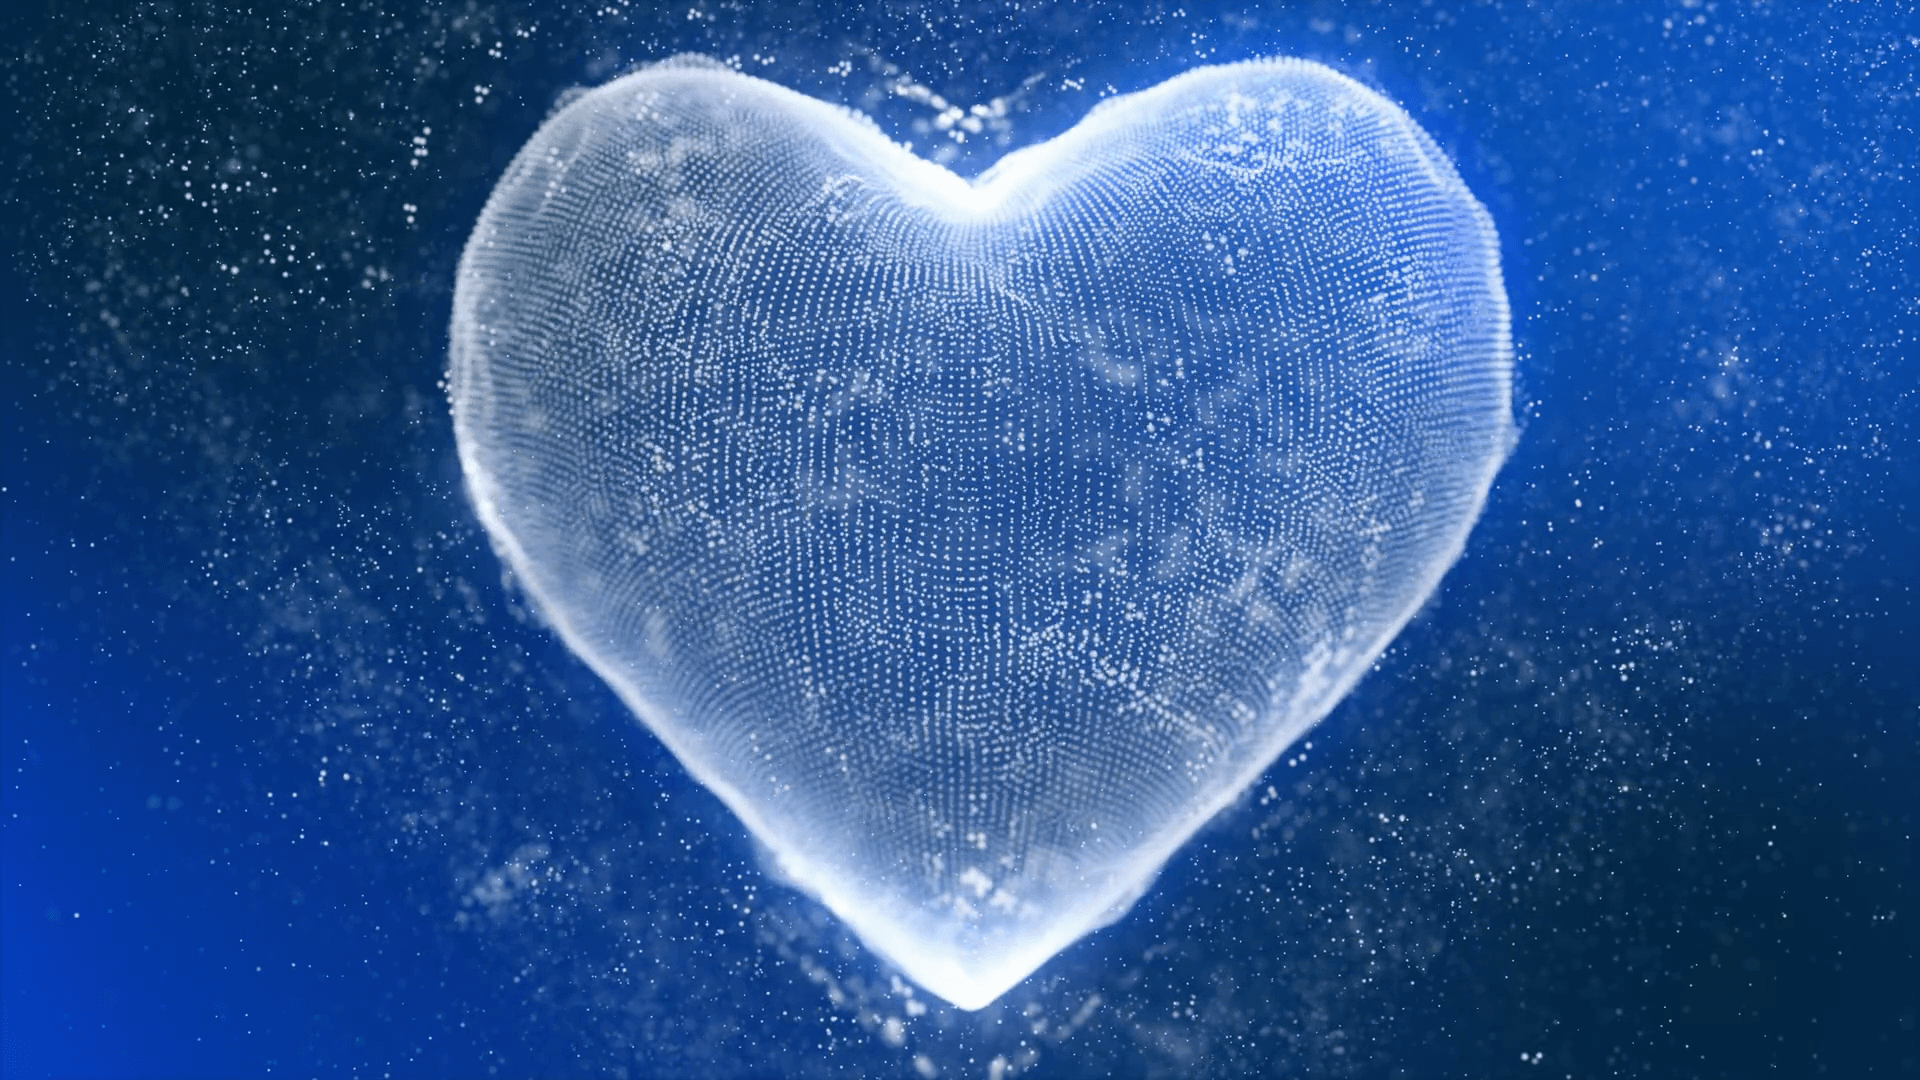 Cool Icy Heart Made of Ice Crystals Seamless Looping Motion